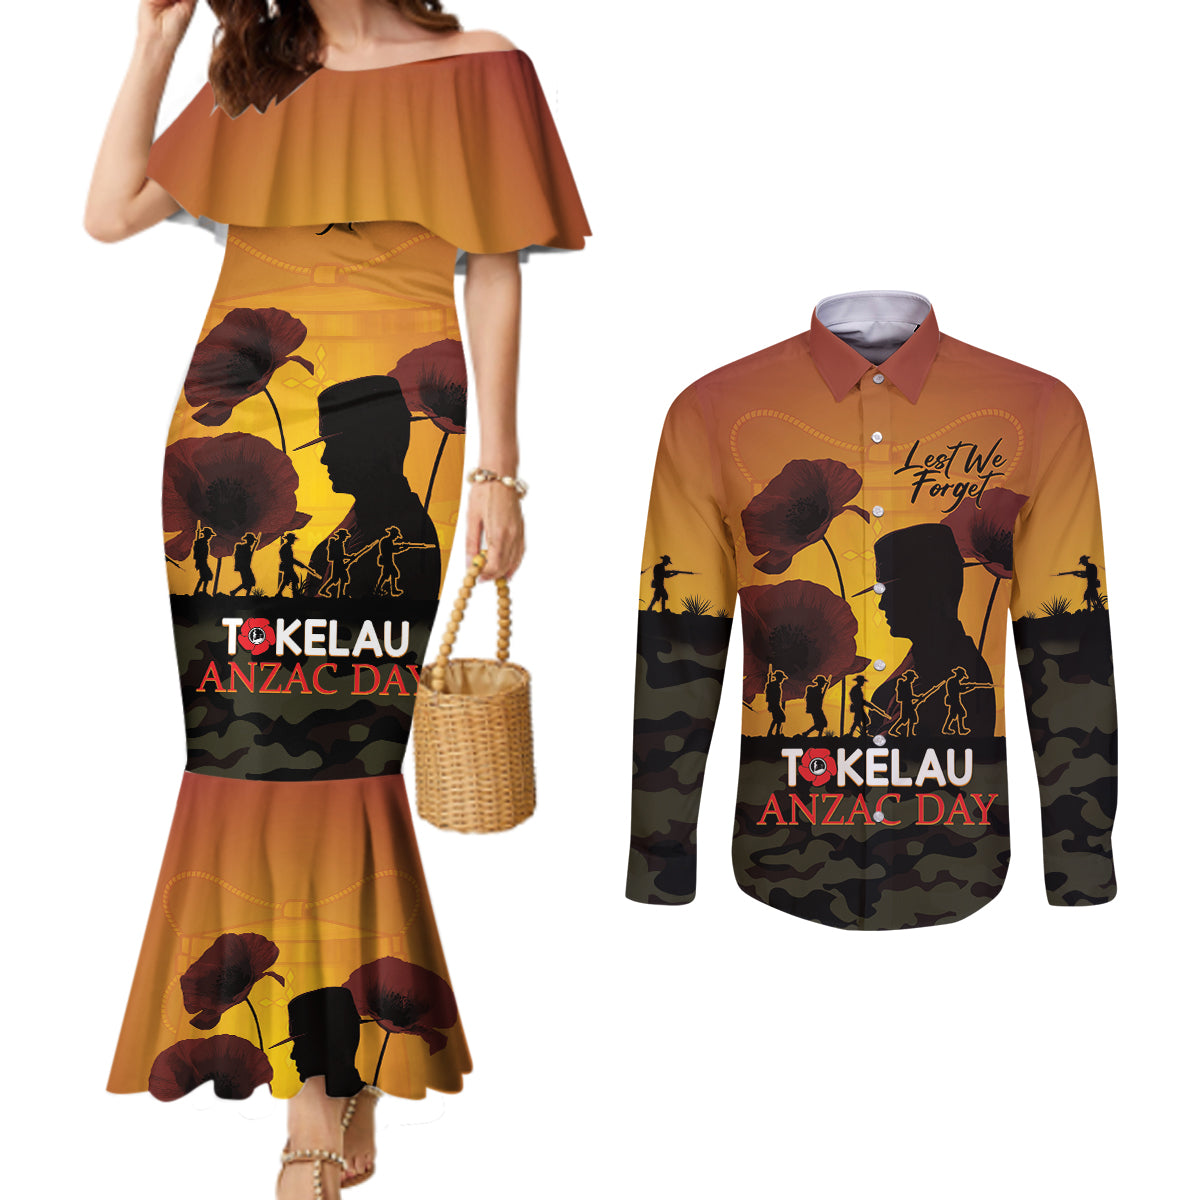 Tokelau ANZAC Day Couples Matching Mermaid Dress and Long Sleeve Button Shirt Camouflage With Poppies Lest We Forget LT14 Yellow - Polynesian Pride